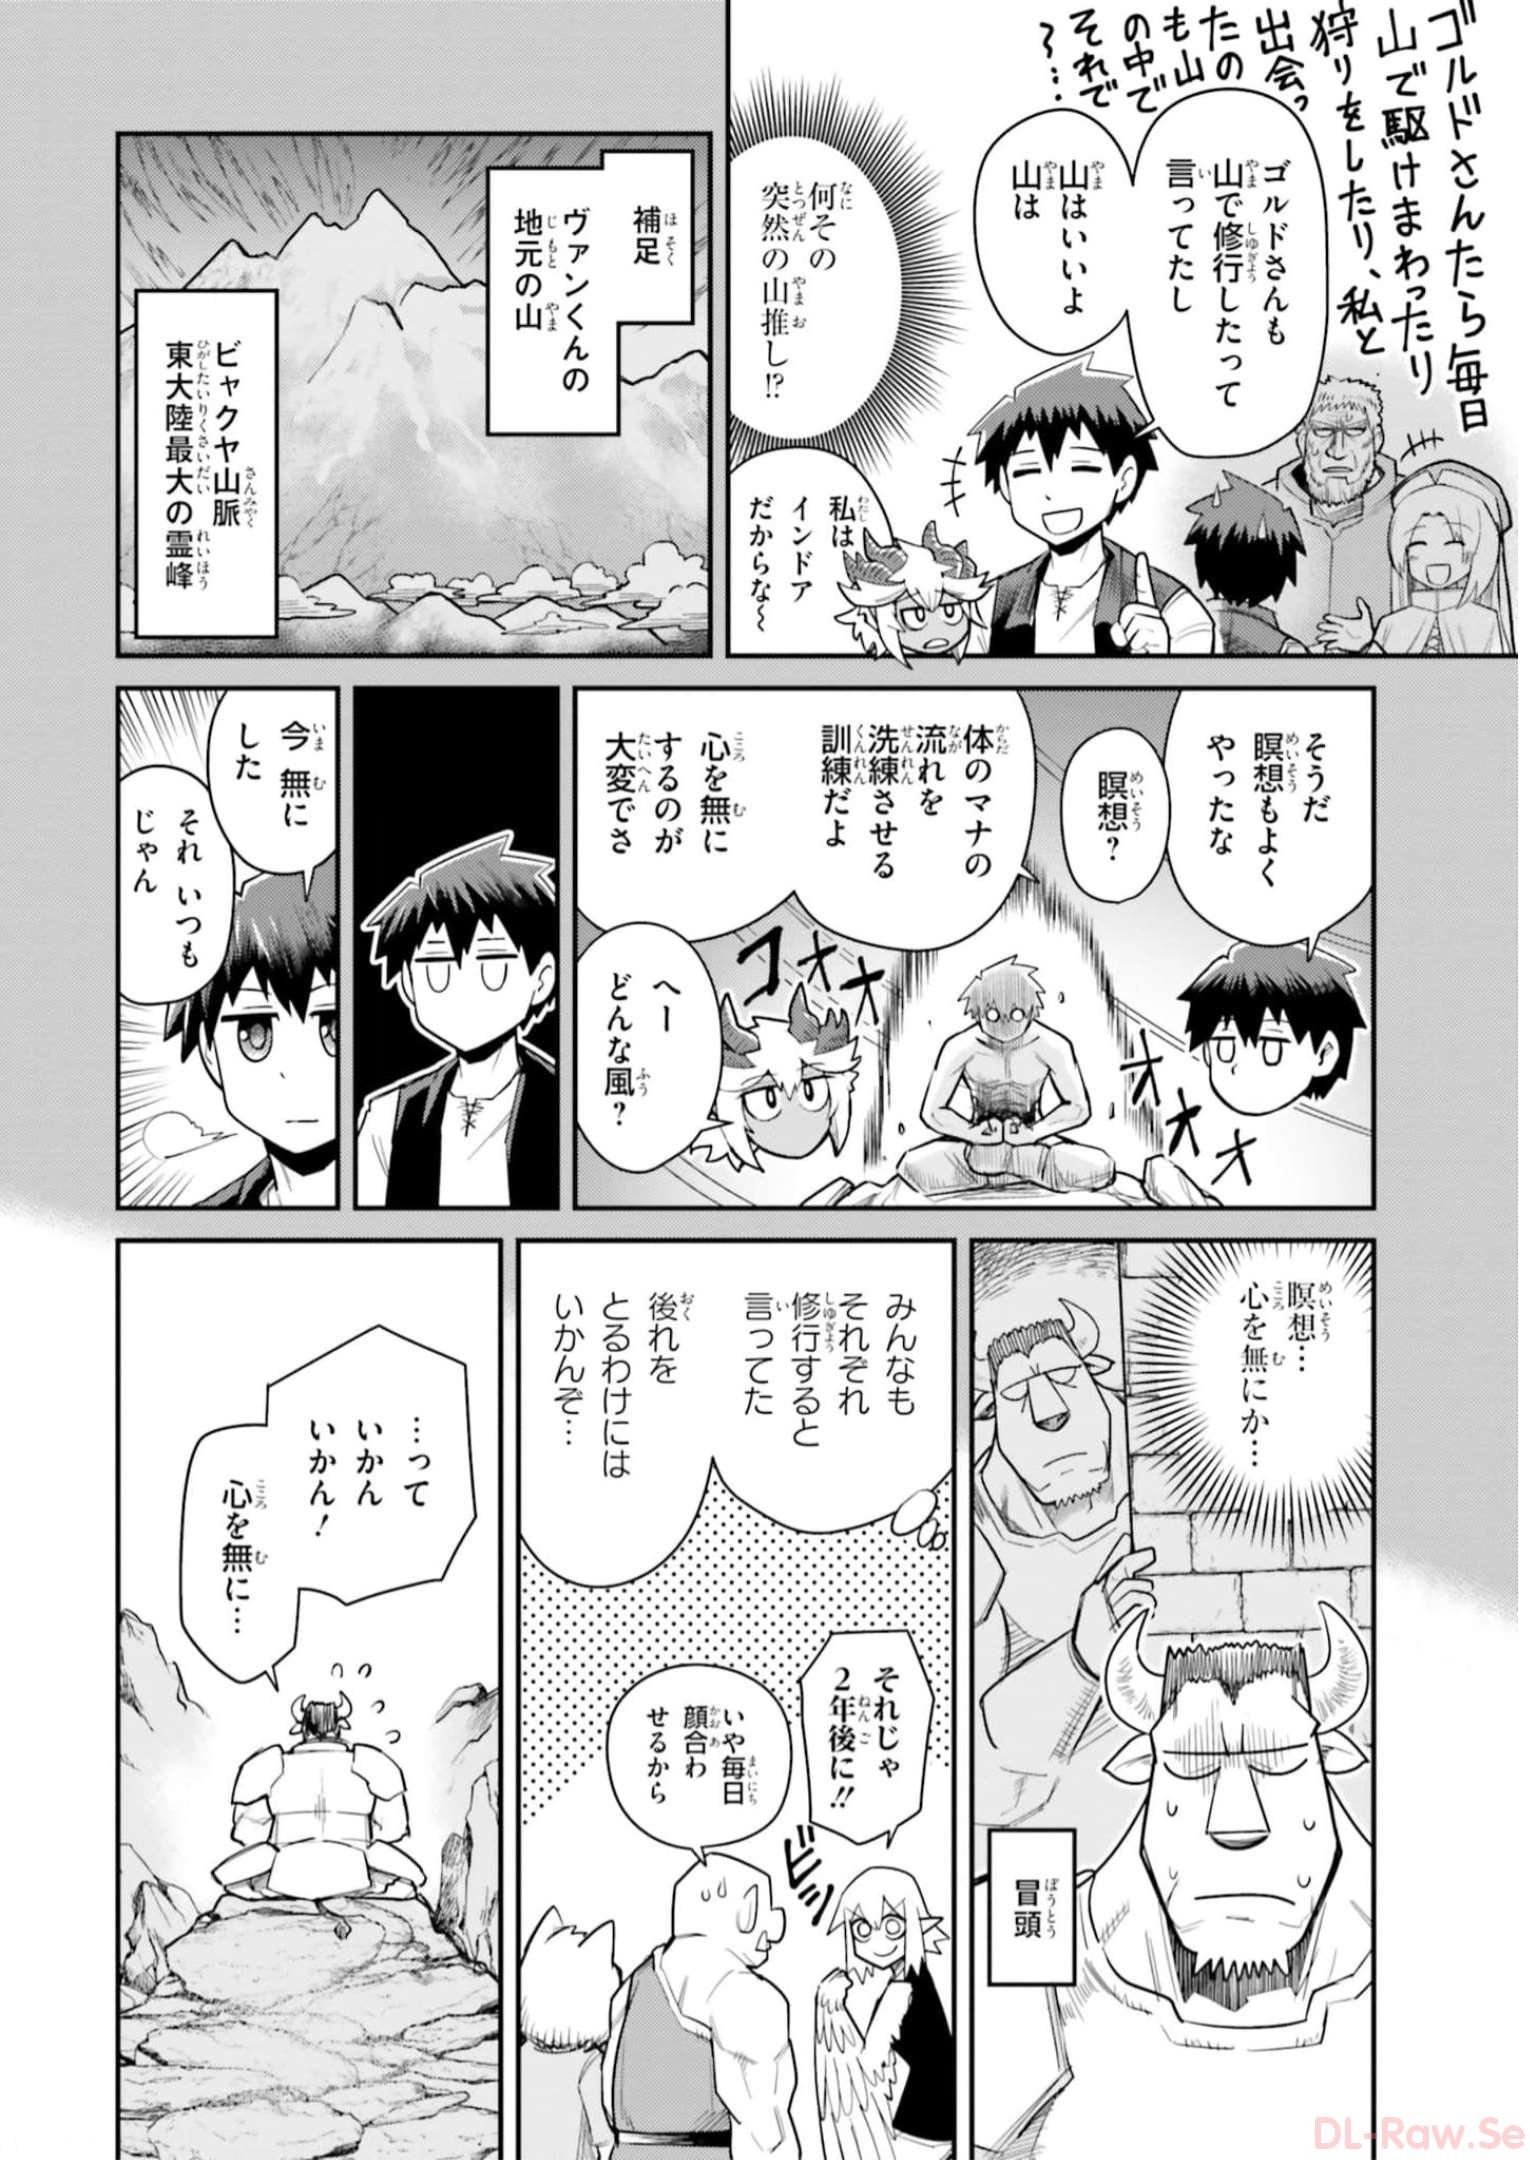 Dungeon Friends Forever Dungeon’s Childhood Friend ダンジョンの幼なじみ 第11話 - Page 4